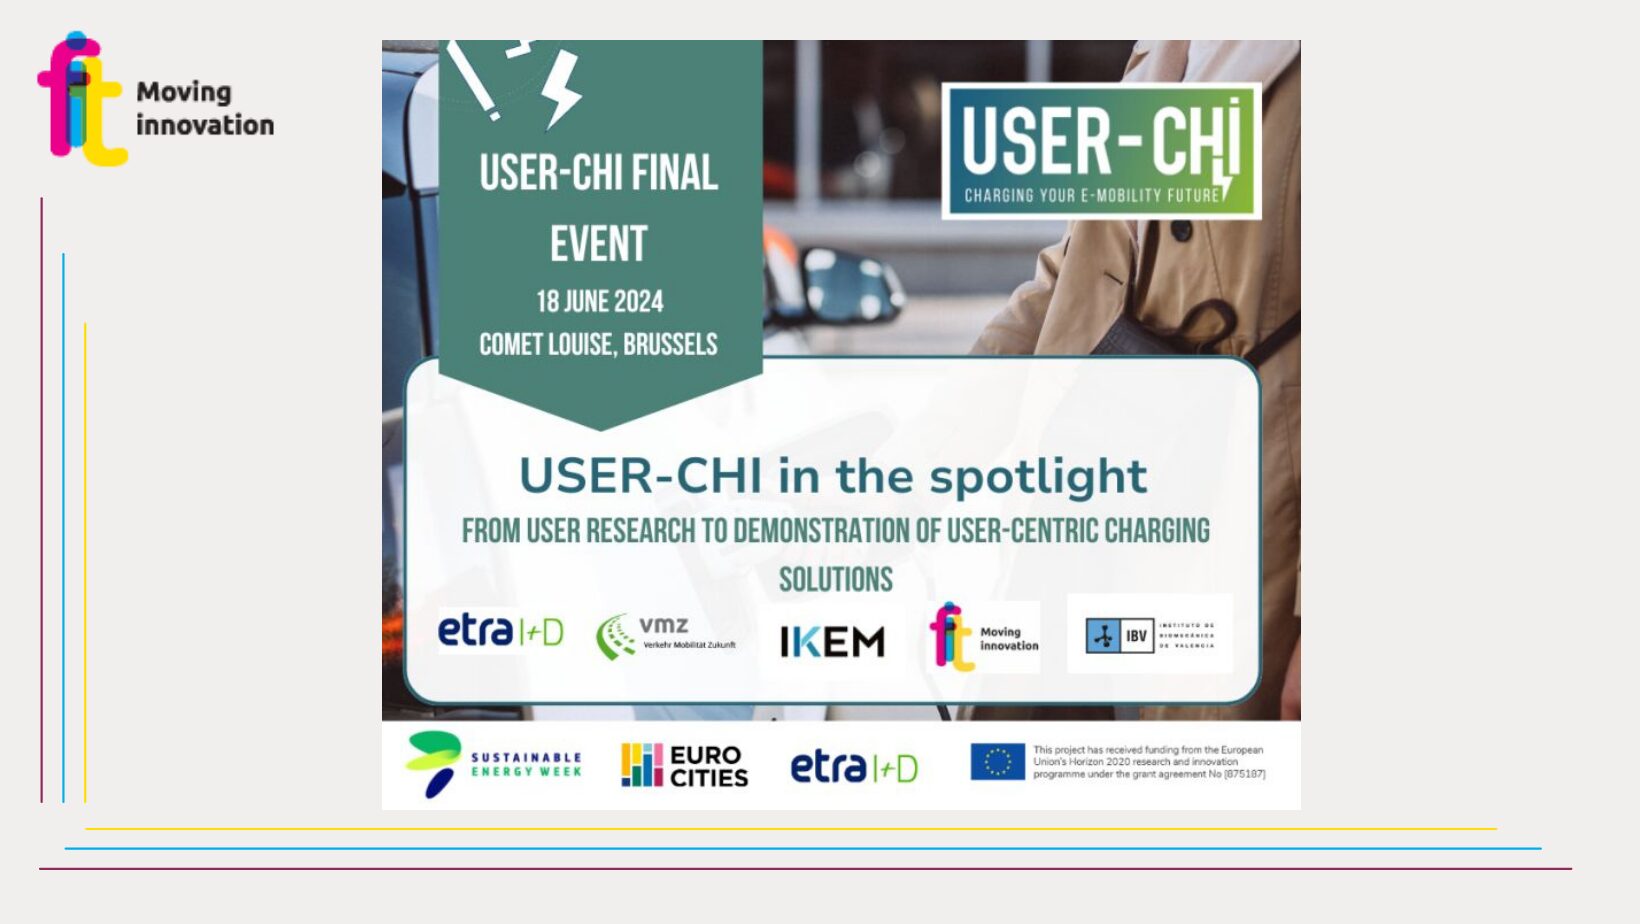 On 18 June in Brussels the final event of the USER-CHI project.